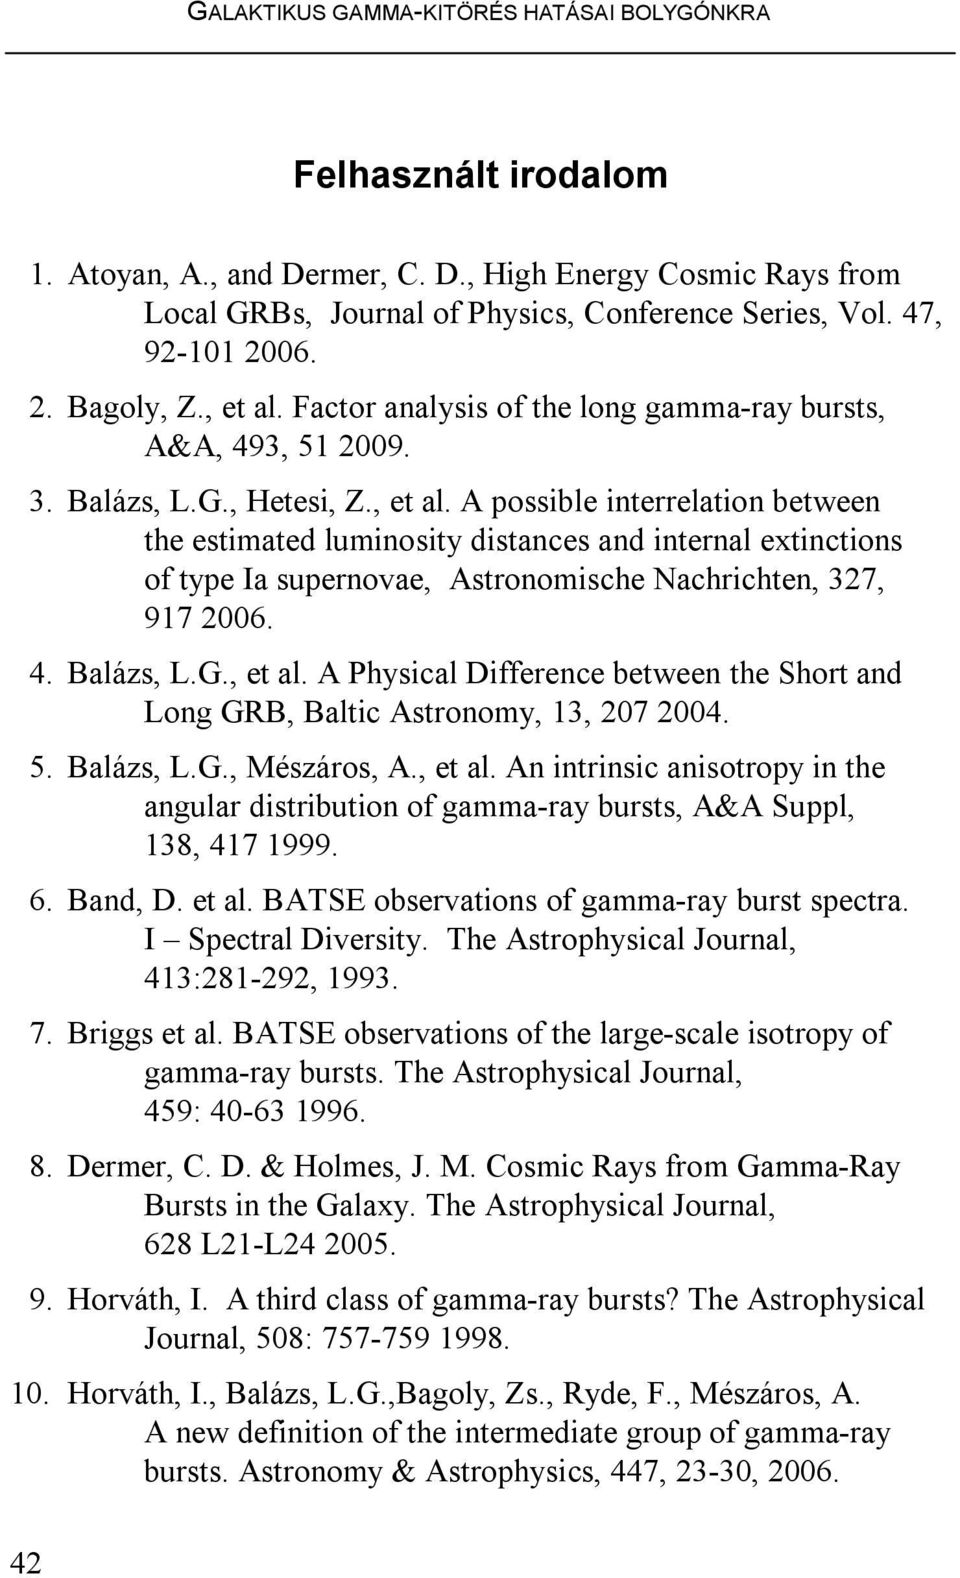 4. Balázs, L.G., et al. A Physical Difference between the Short and Long GRB, Baltic Astronomy, 13, 207 2004. 5. Balázs, L.G., Mészáros, A., et al. An intrinsic anisotropy in the angular distribution of gamma-ray bursts, A&A Suppl, 138, 417 1999.